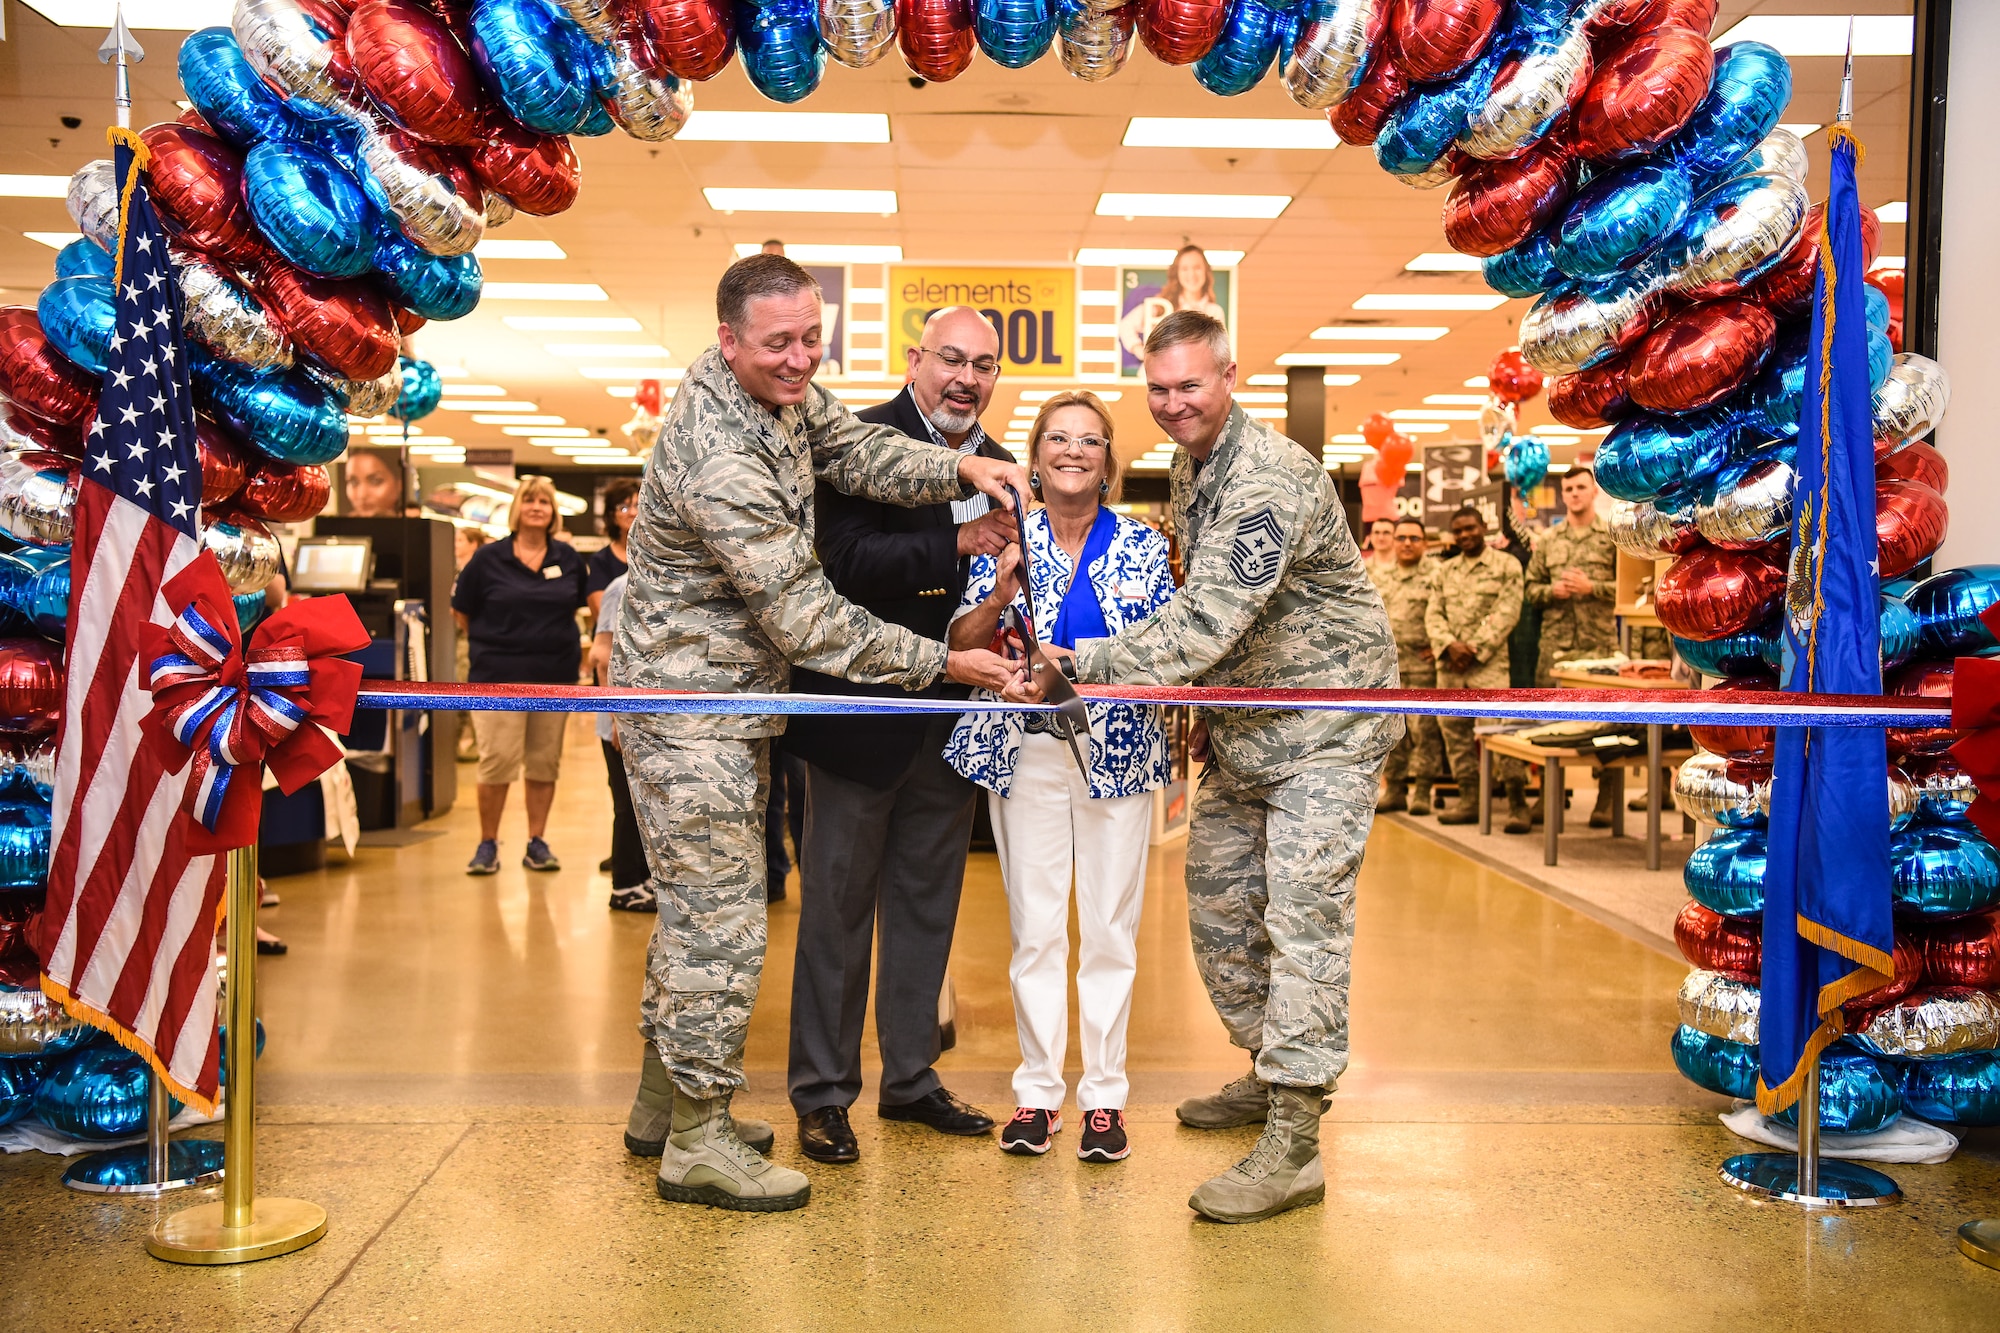 319th Air Base Wing Commander Col. Benjamin Spencer cuts the ribbon on the renovated Army & Air Force Exchange Service exchange during a grand reopening celebration August 10th alongside AAFES Central Regional Vice President Larry Salgado, Exchange General Manager Annette Montgomery, and 319th Air Base Wing Command Chief Master Sergeant Brian Thomas. Since 1895 AAFES has supported America's military men and women and completed store renovations within six months at Grand Forks Air Force Base, North Dakota.